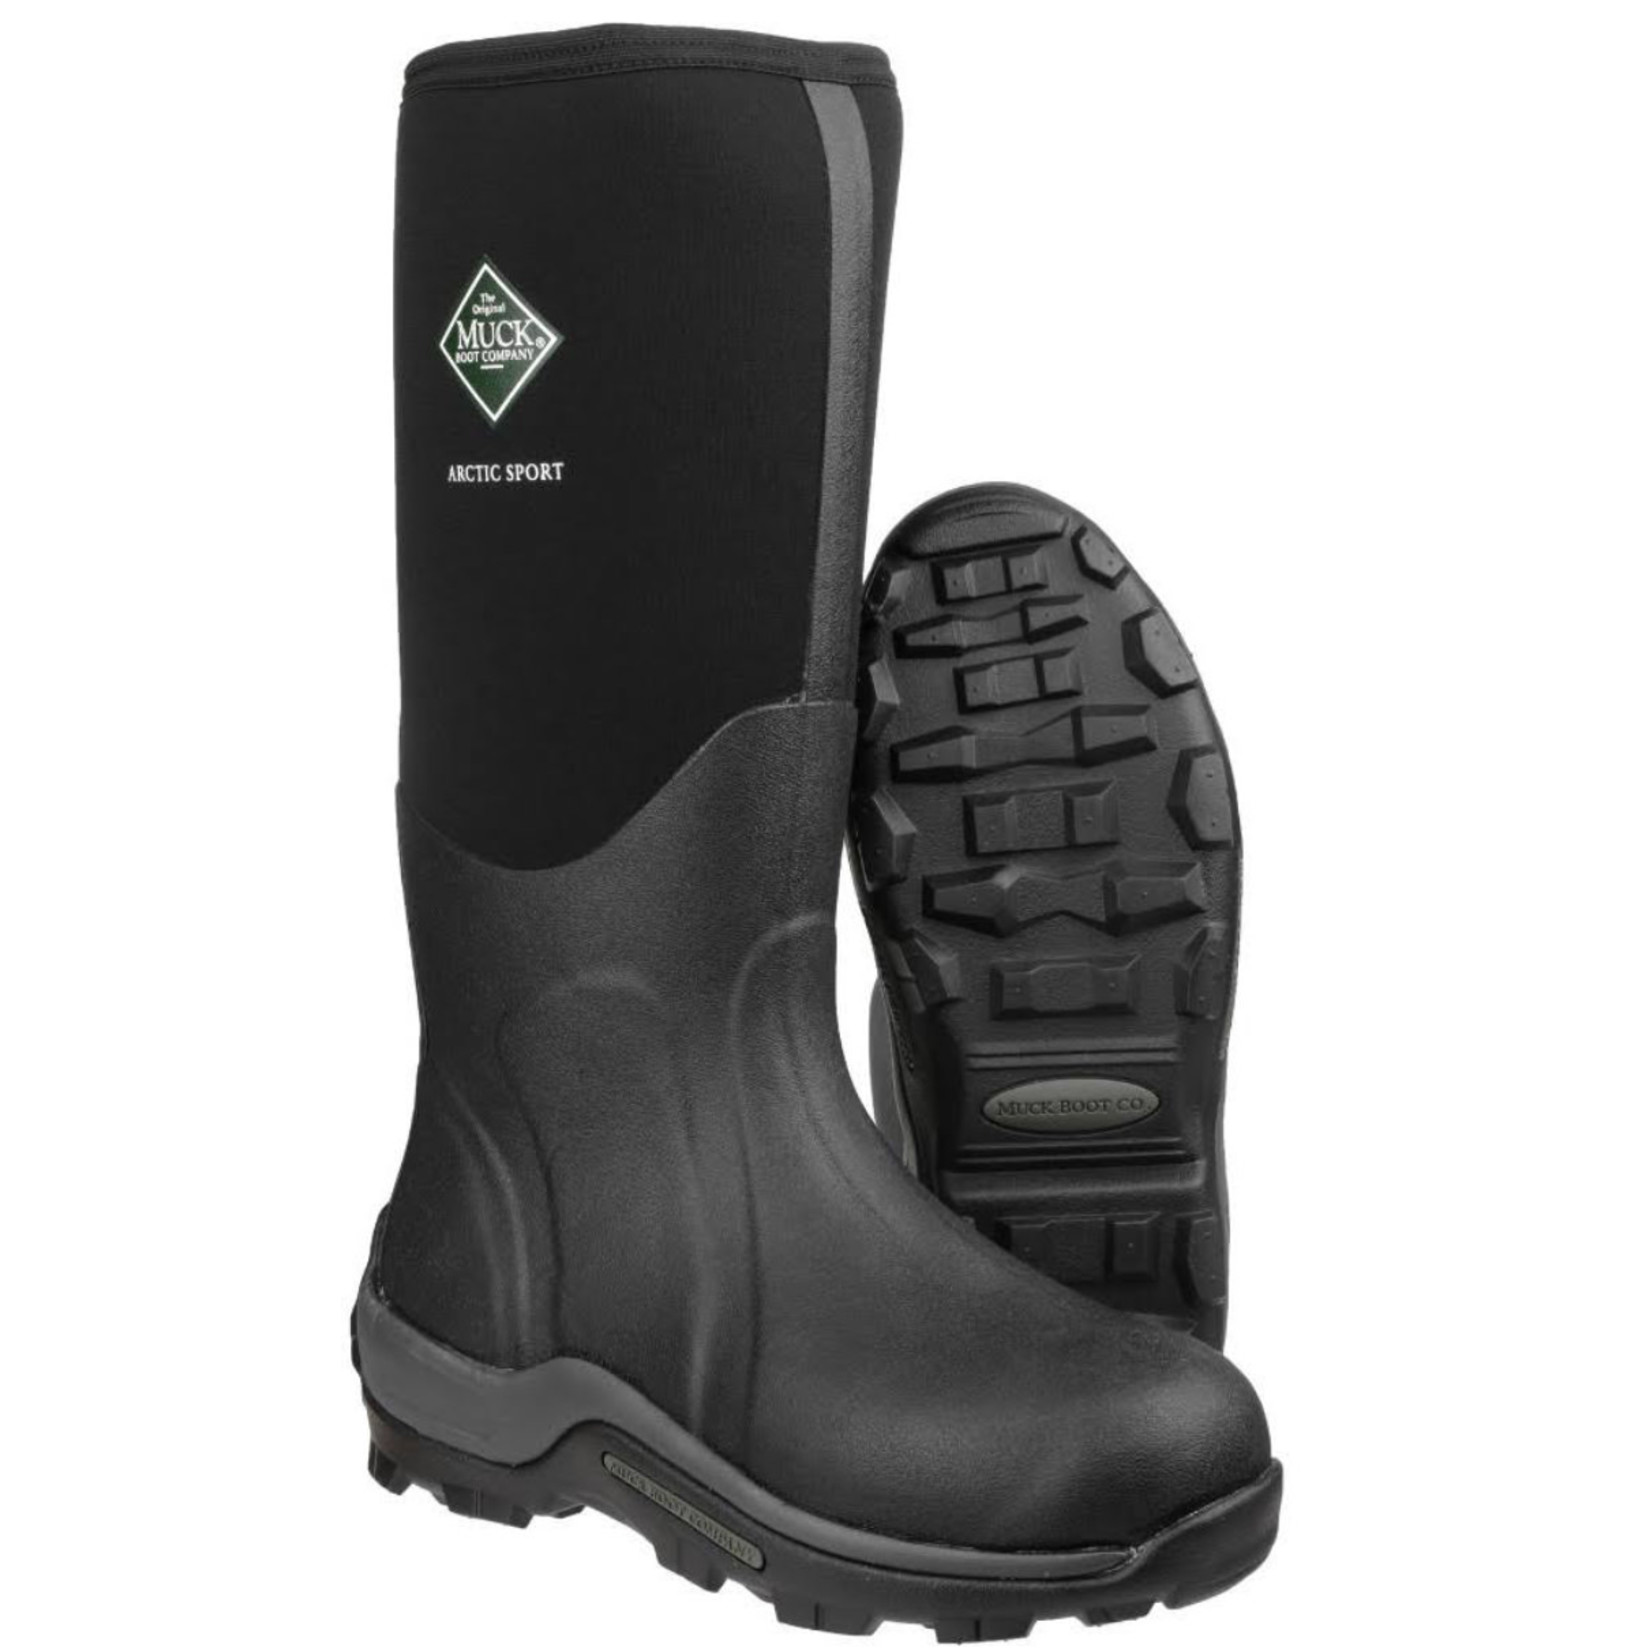 Muck Boot Arctic Sport Mid Boots Black High Performance Sport Boots ASM-000A 